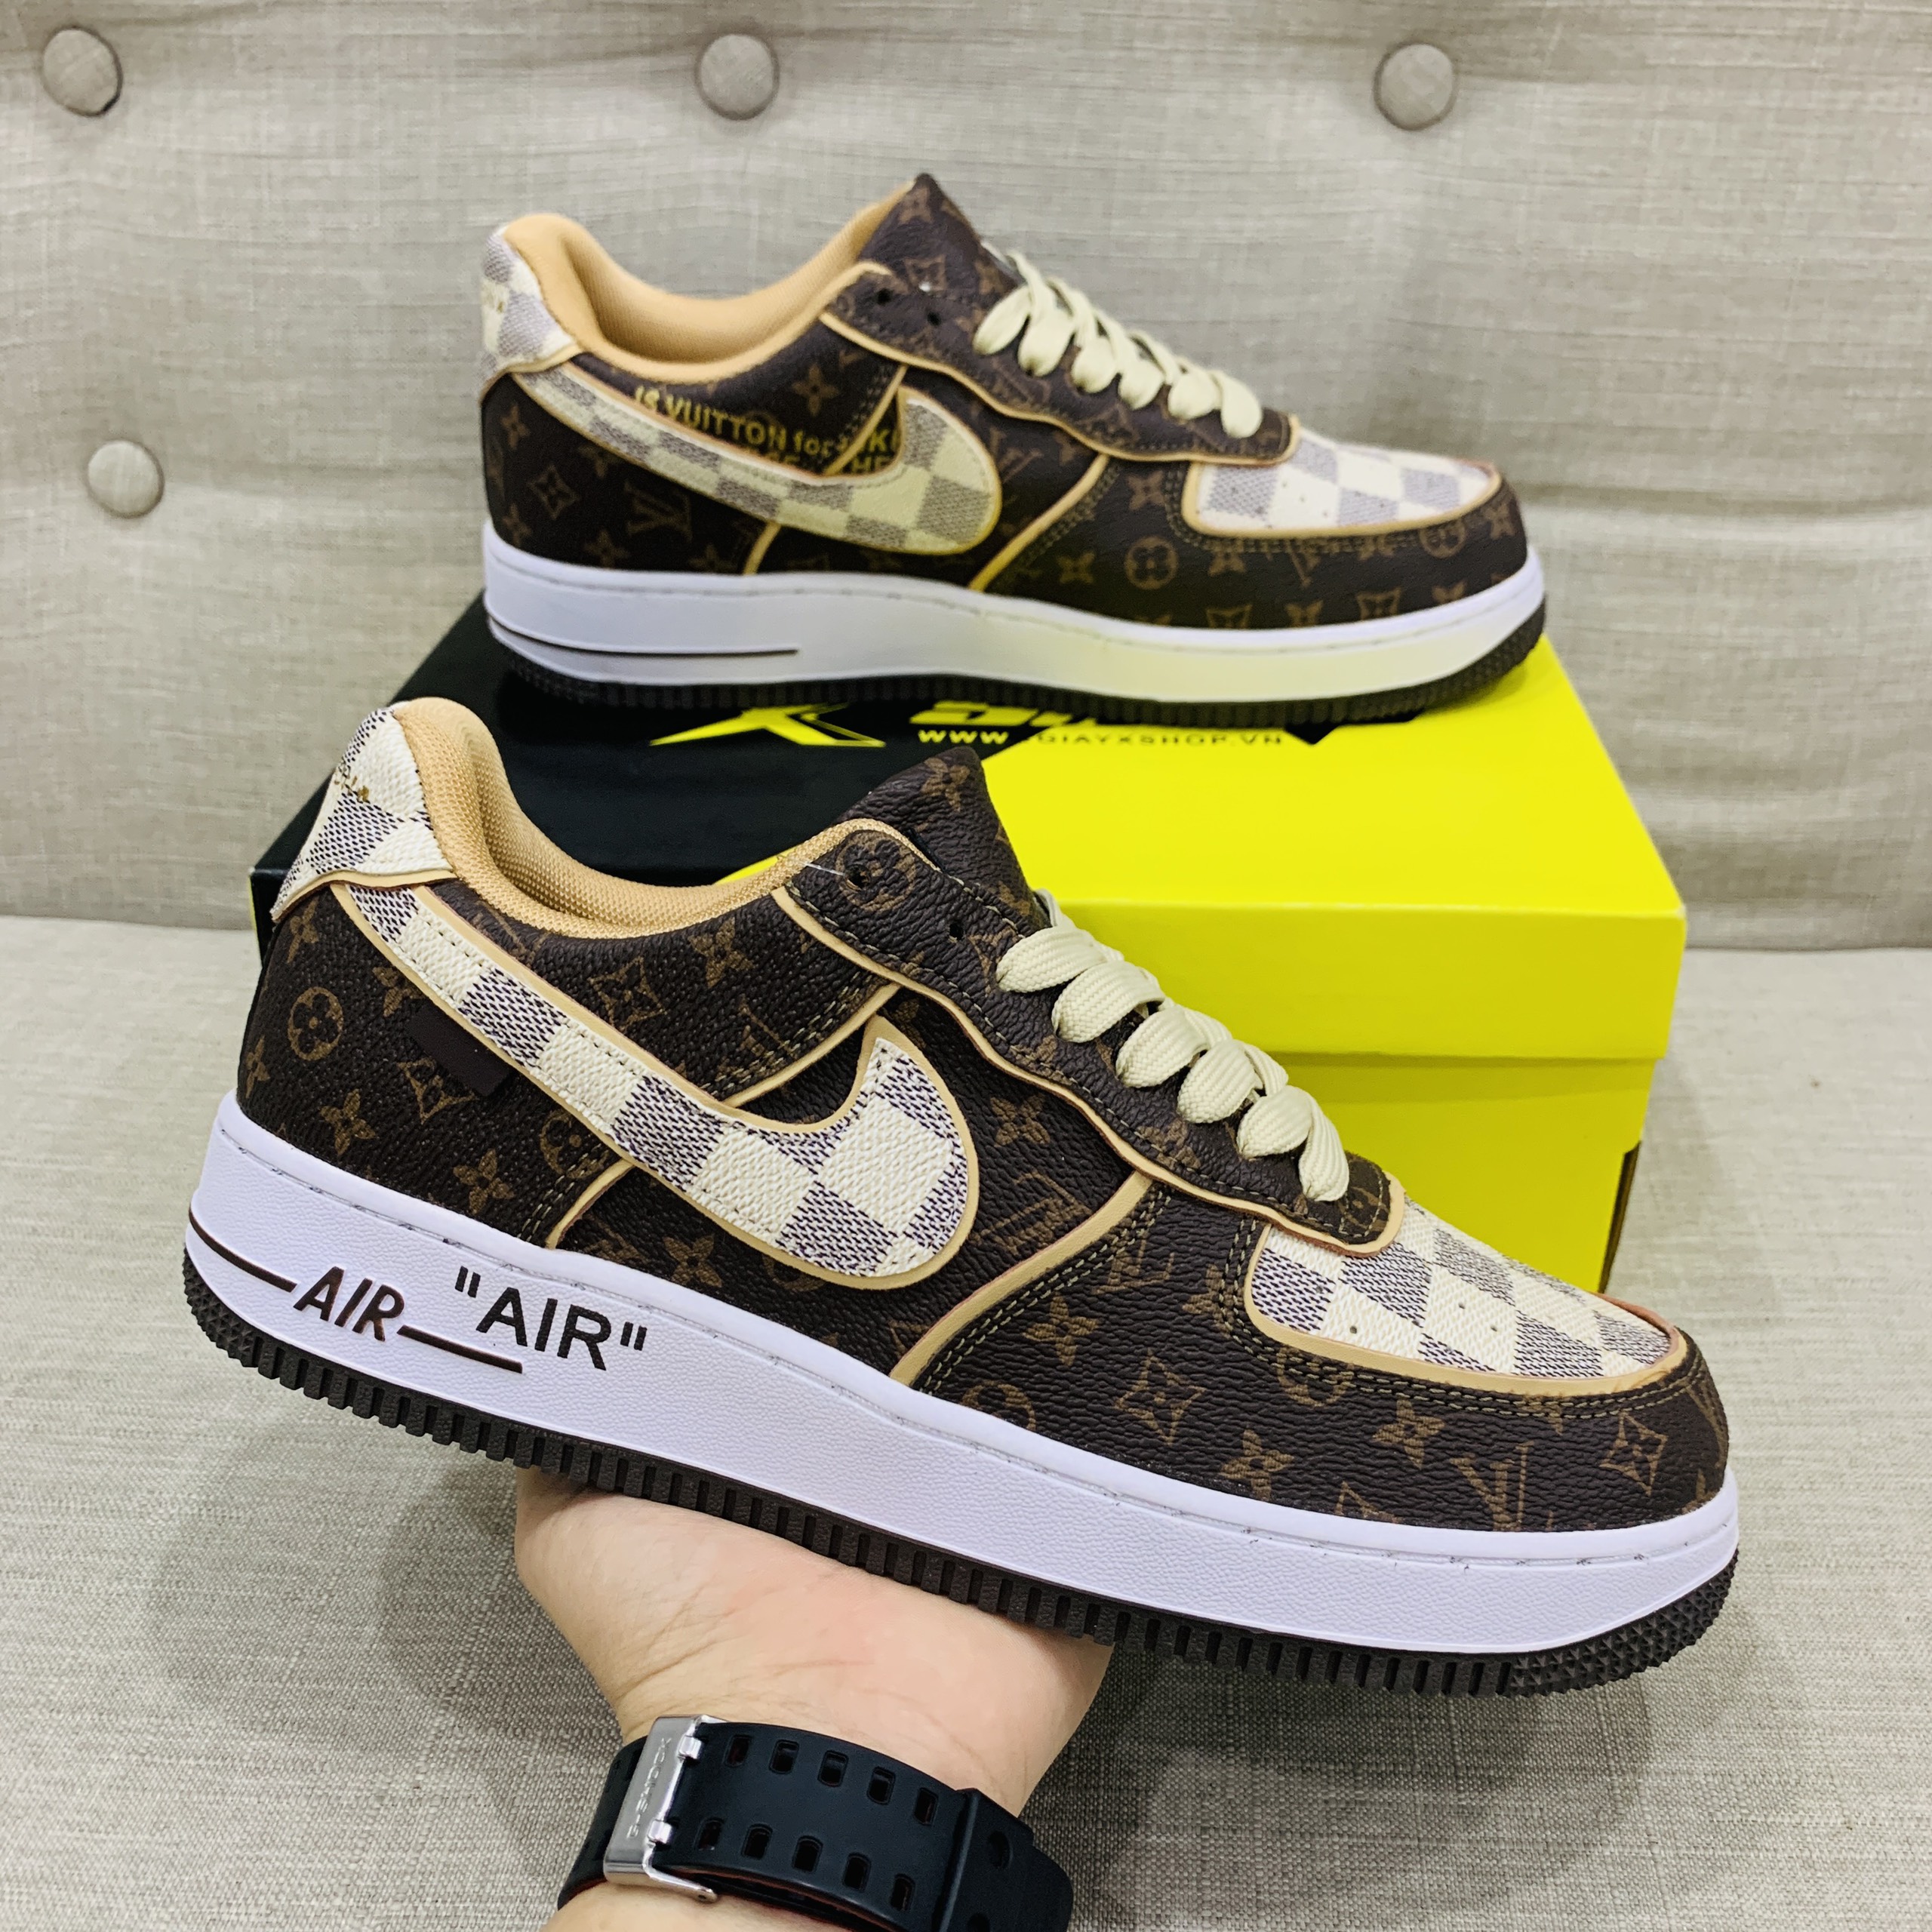 Inspired by Virgil  Making the Louis Vuitton Air Force 1  Reshoevn8r